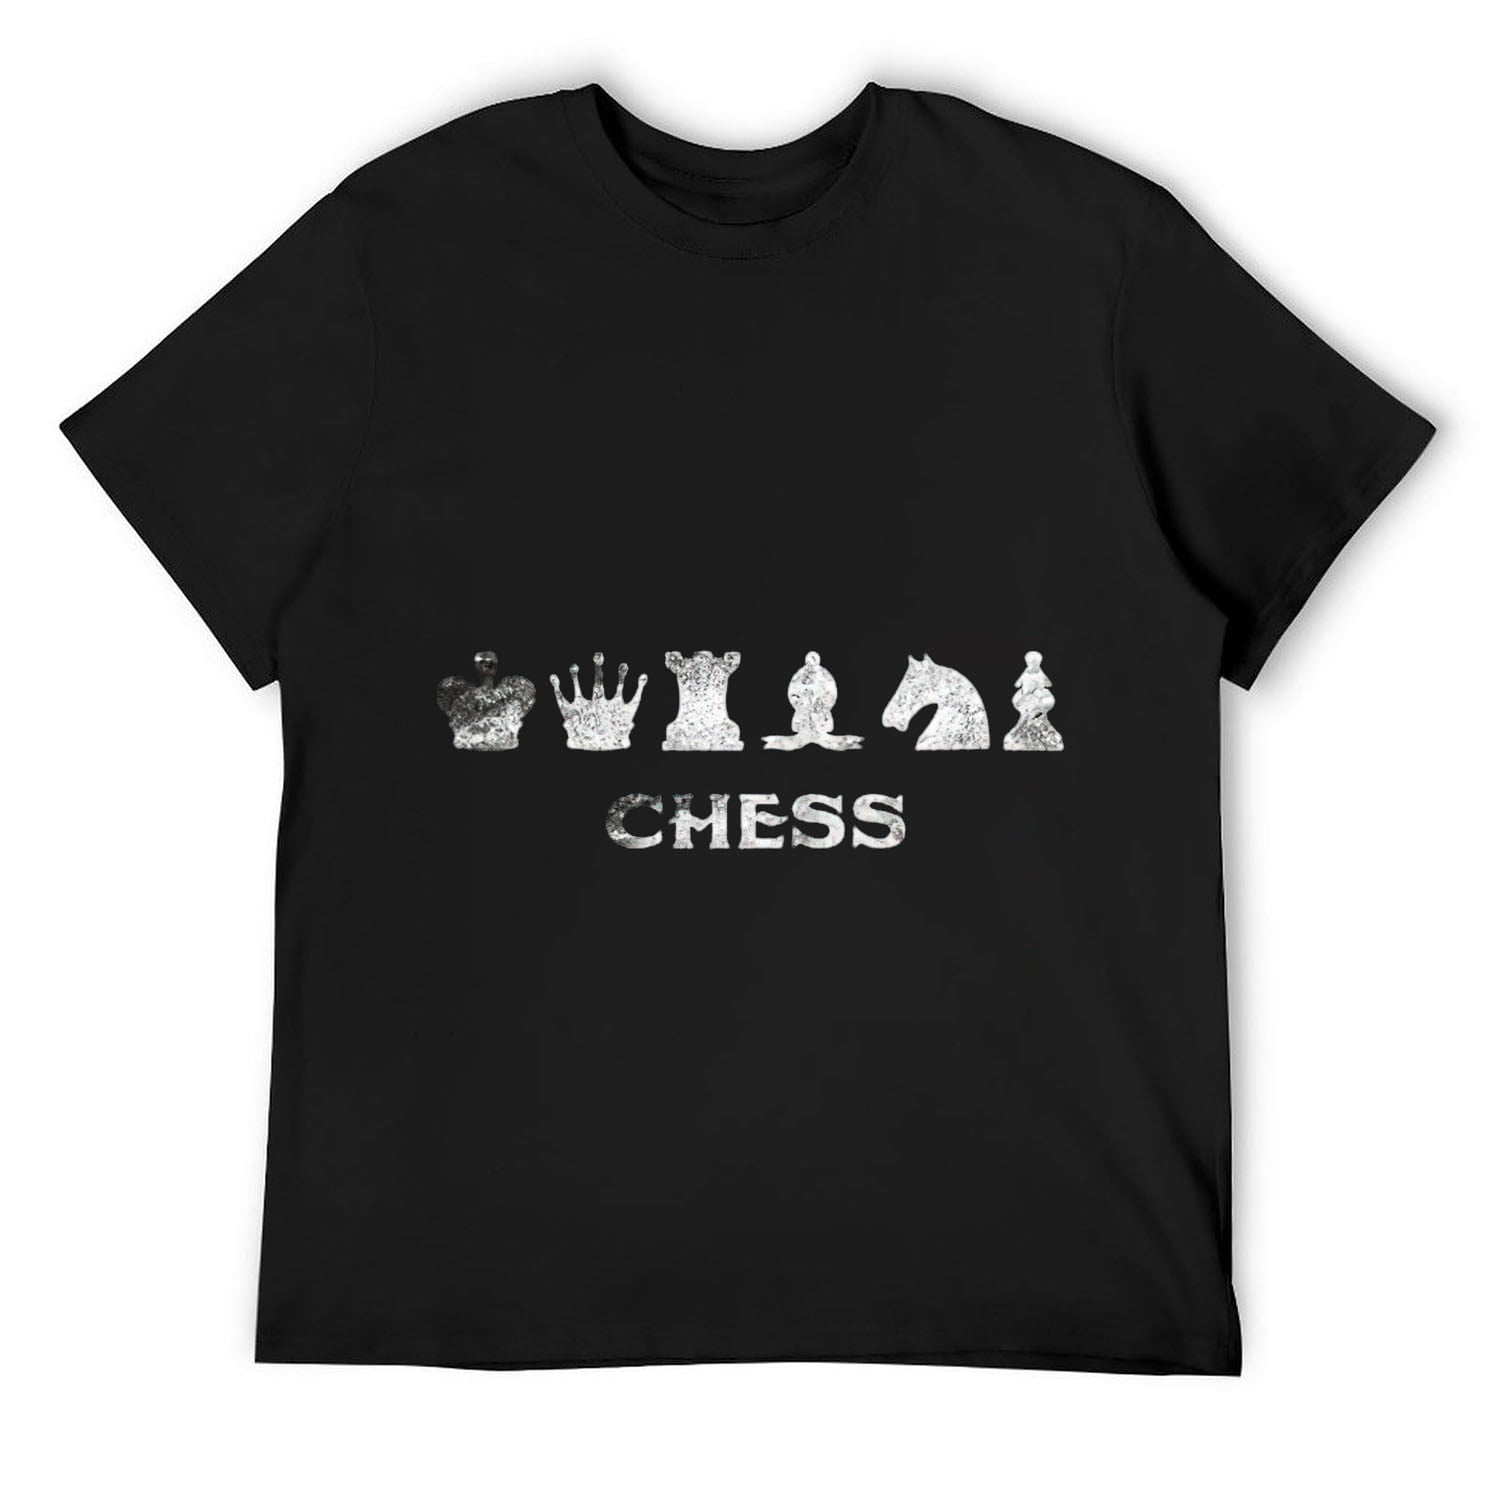 Mens Chess Play Love Vintage Cool Graphic Design T-Shirt Black Large ...